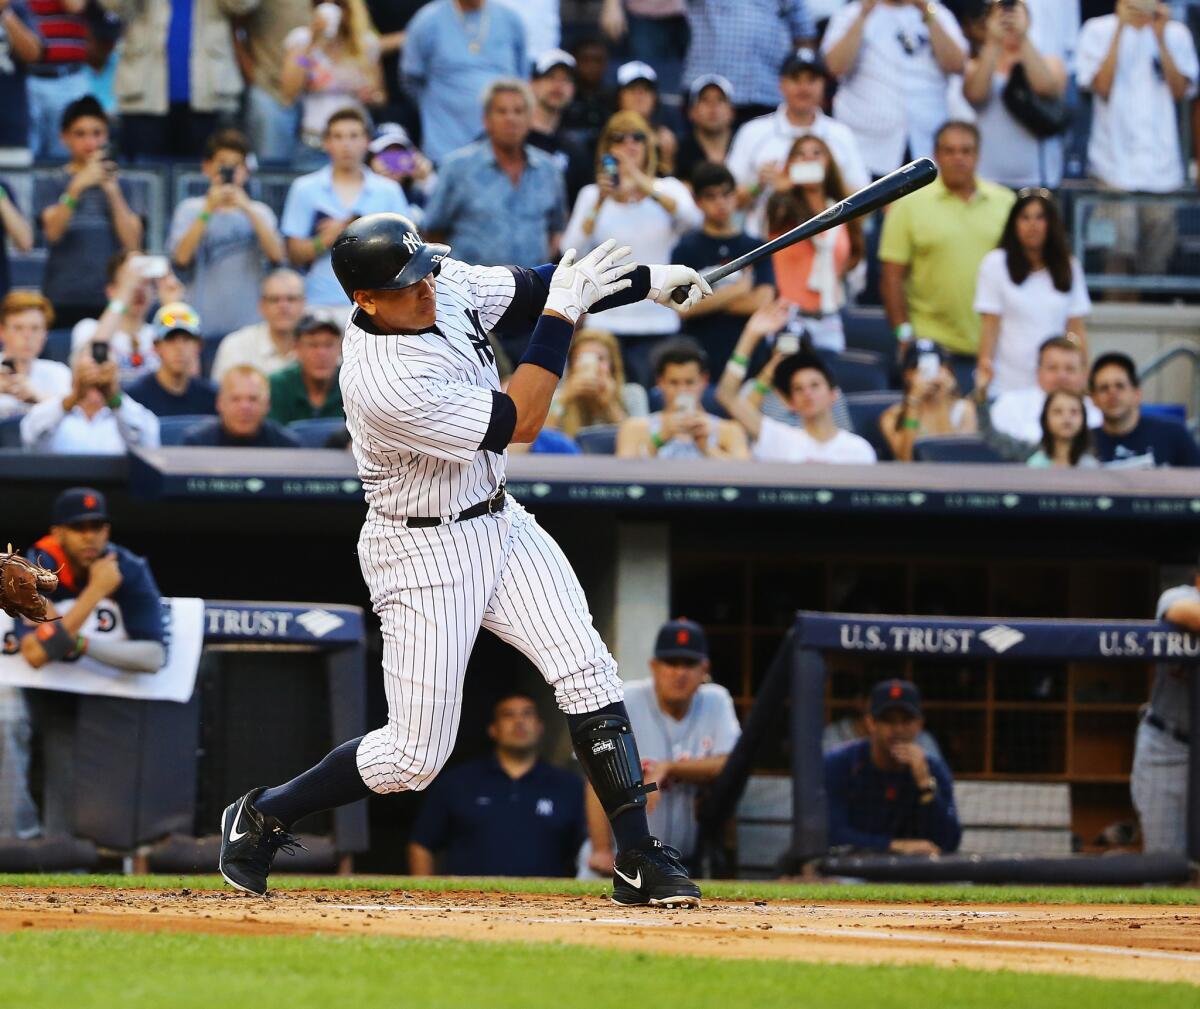 Alex Rodriguez of the New York Yankees hits a home run to get his 3,000th career hit in the first inning of a game Friday against the Detroit Tigers in New York City.